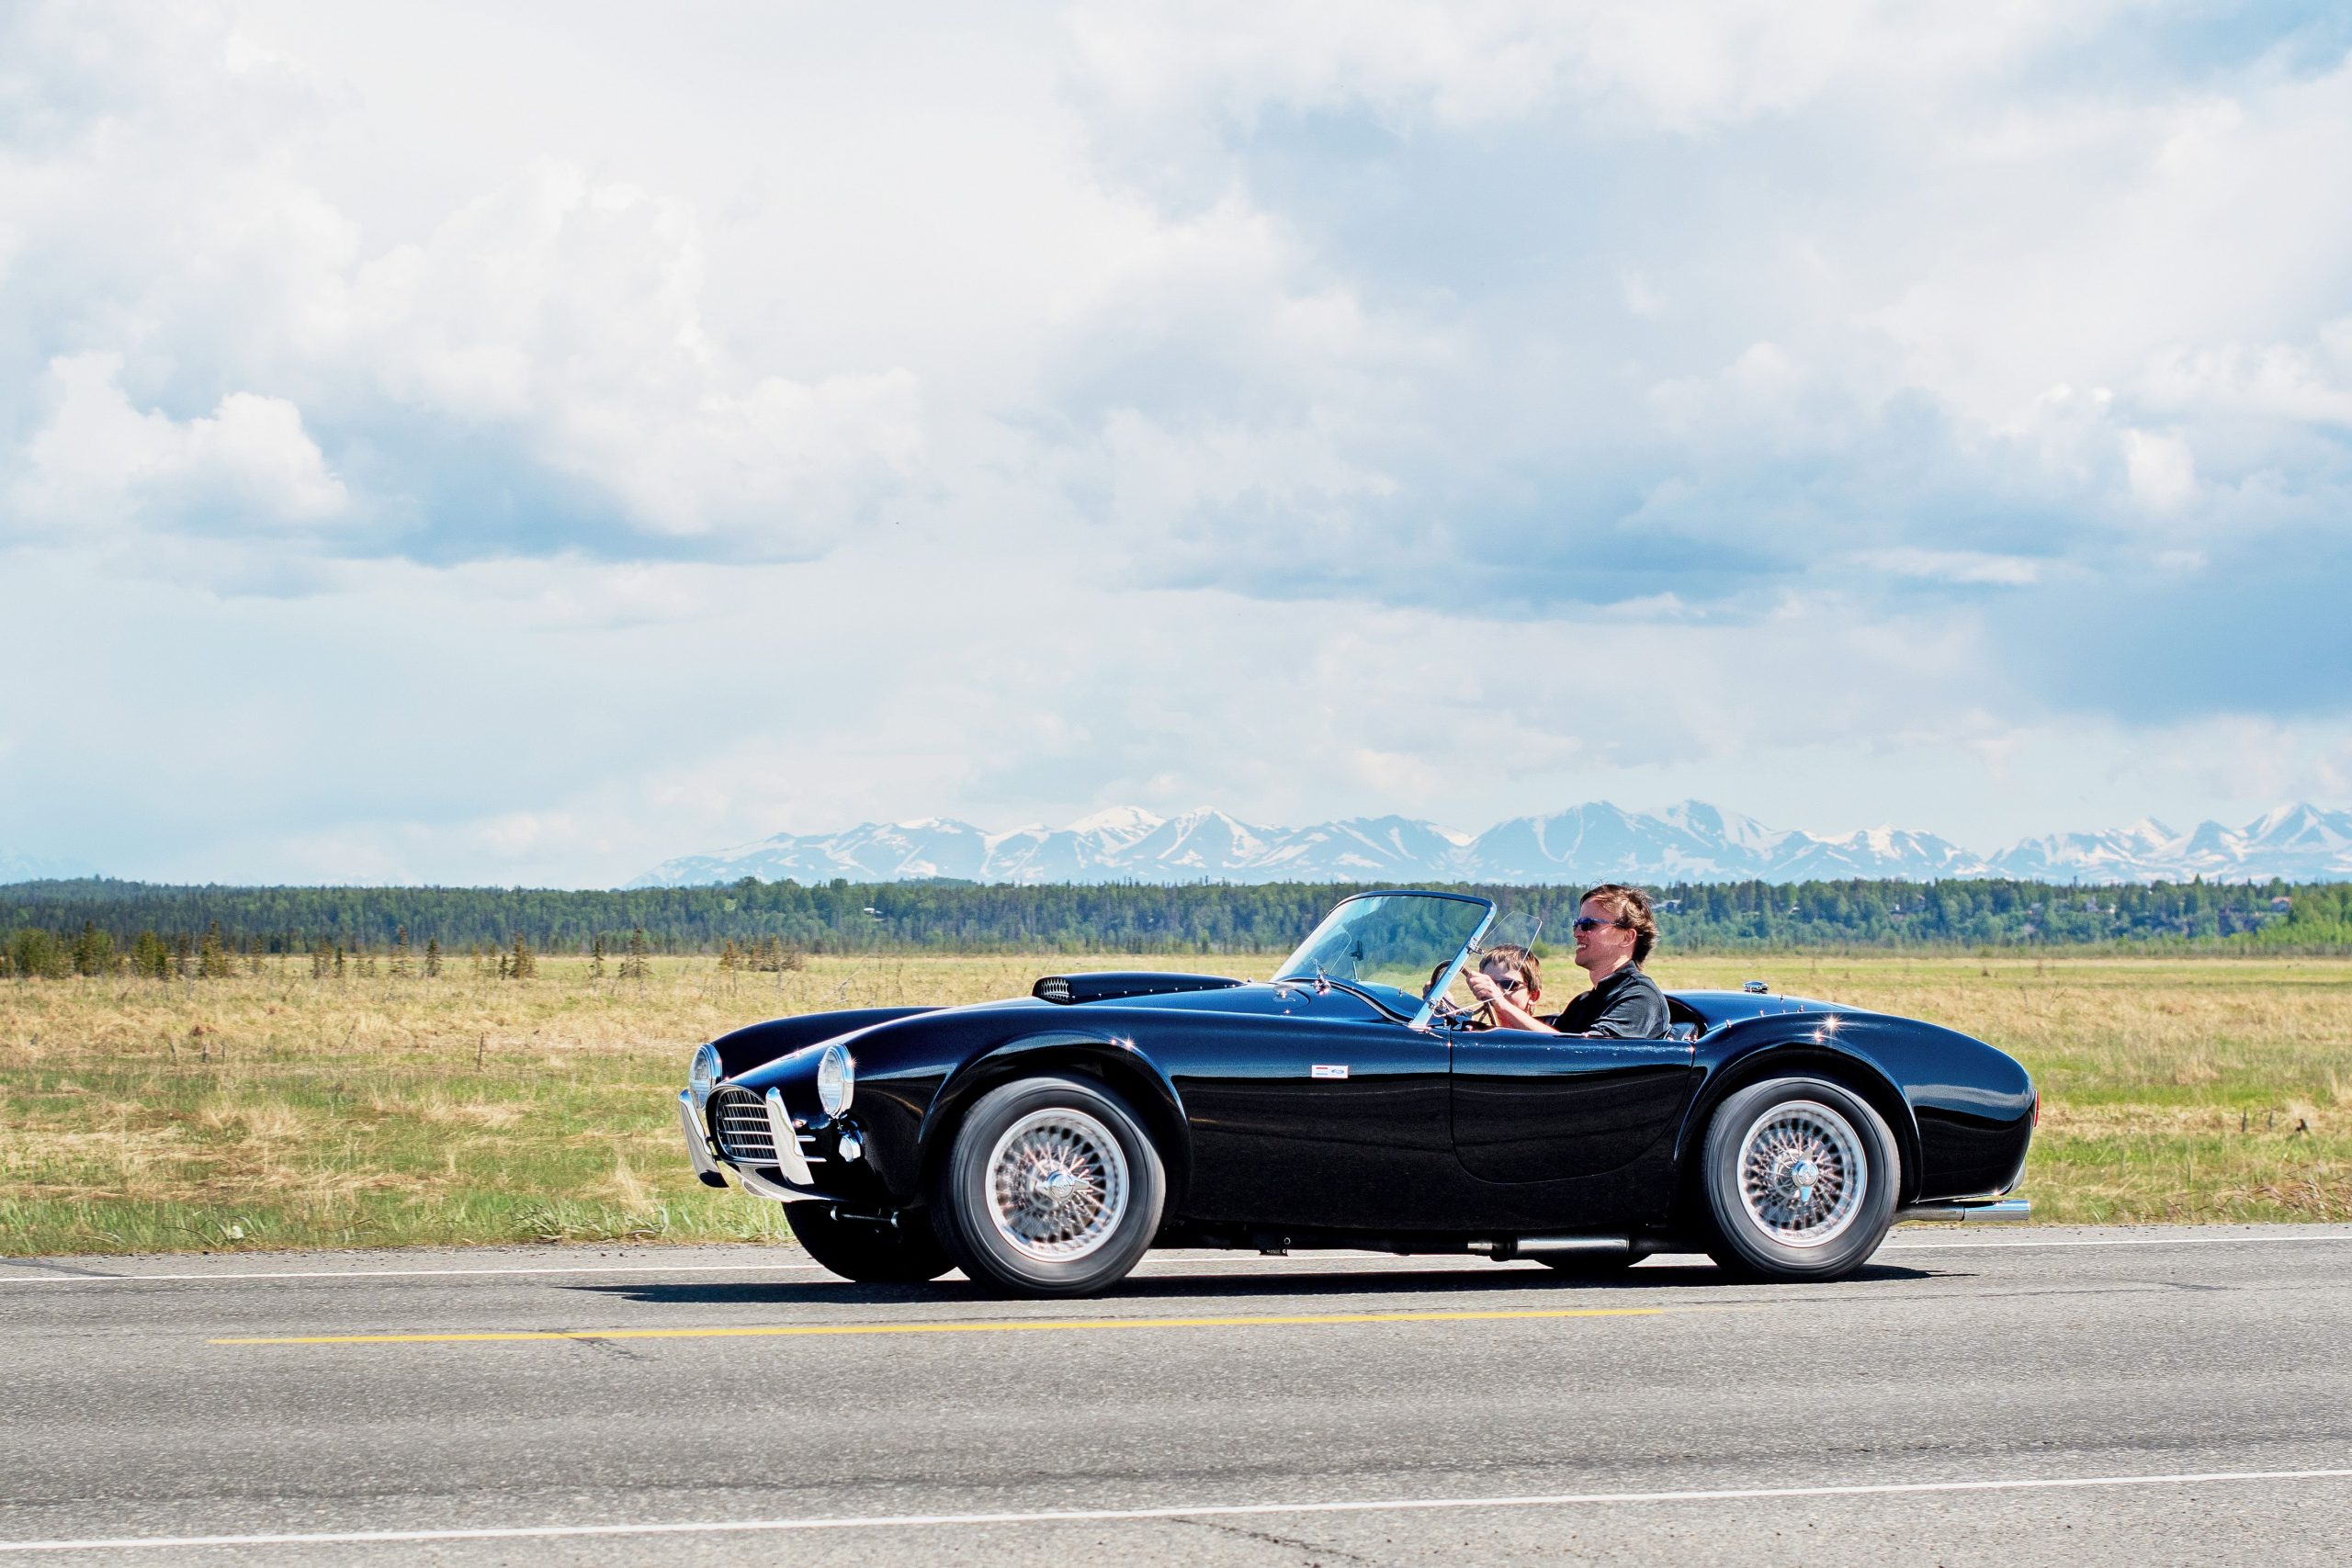 Go North: The 1963 Shelby Cobra That Made History